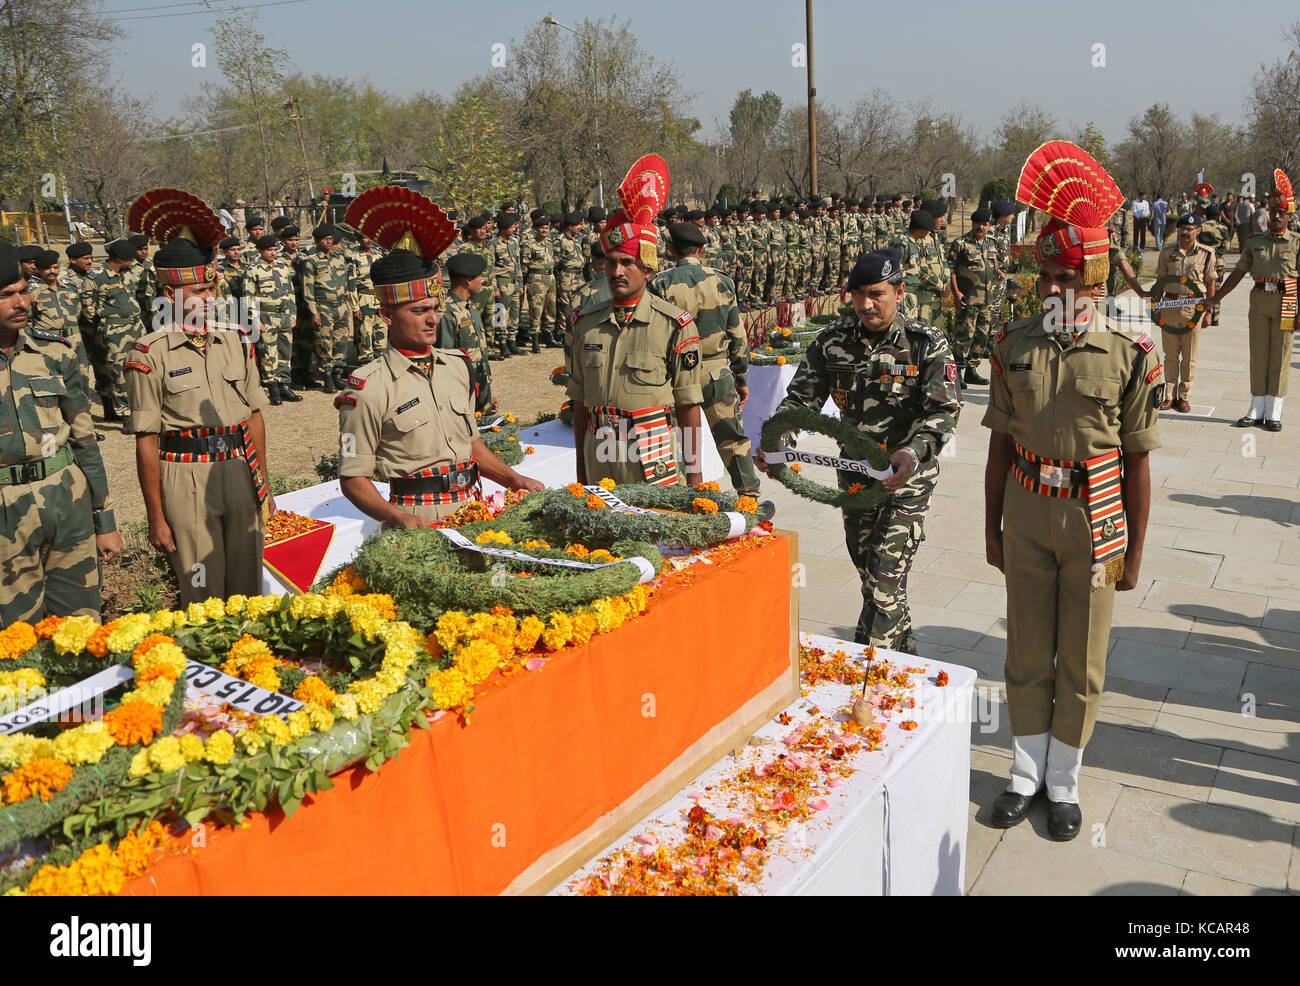 Srinagar, Kashmir. 4th October, 2017. An officer of India's Border Security Force (BSF) lays a wreath on the coffin of a border guard who was killed in a militant attack during the wreath laying ceremony at a BSF base camp on the outskirts of Srinagar, summer capital of Kashmir. An Indian border guard and two militants were killed, while as three others and a policeman were wounded Tuesday in a predawn militant attack on India's BSF camp in restive Kashmir, police said. Credit: Javed Dar/Xinhua/Alamy Live News Stock Photo